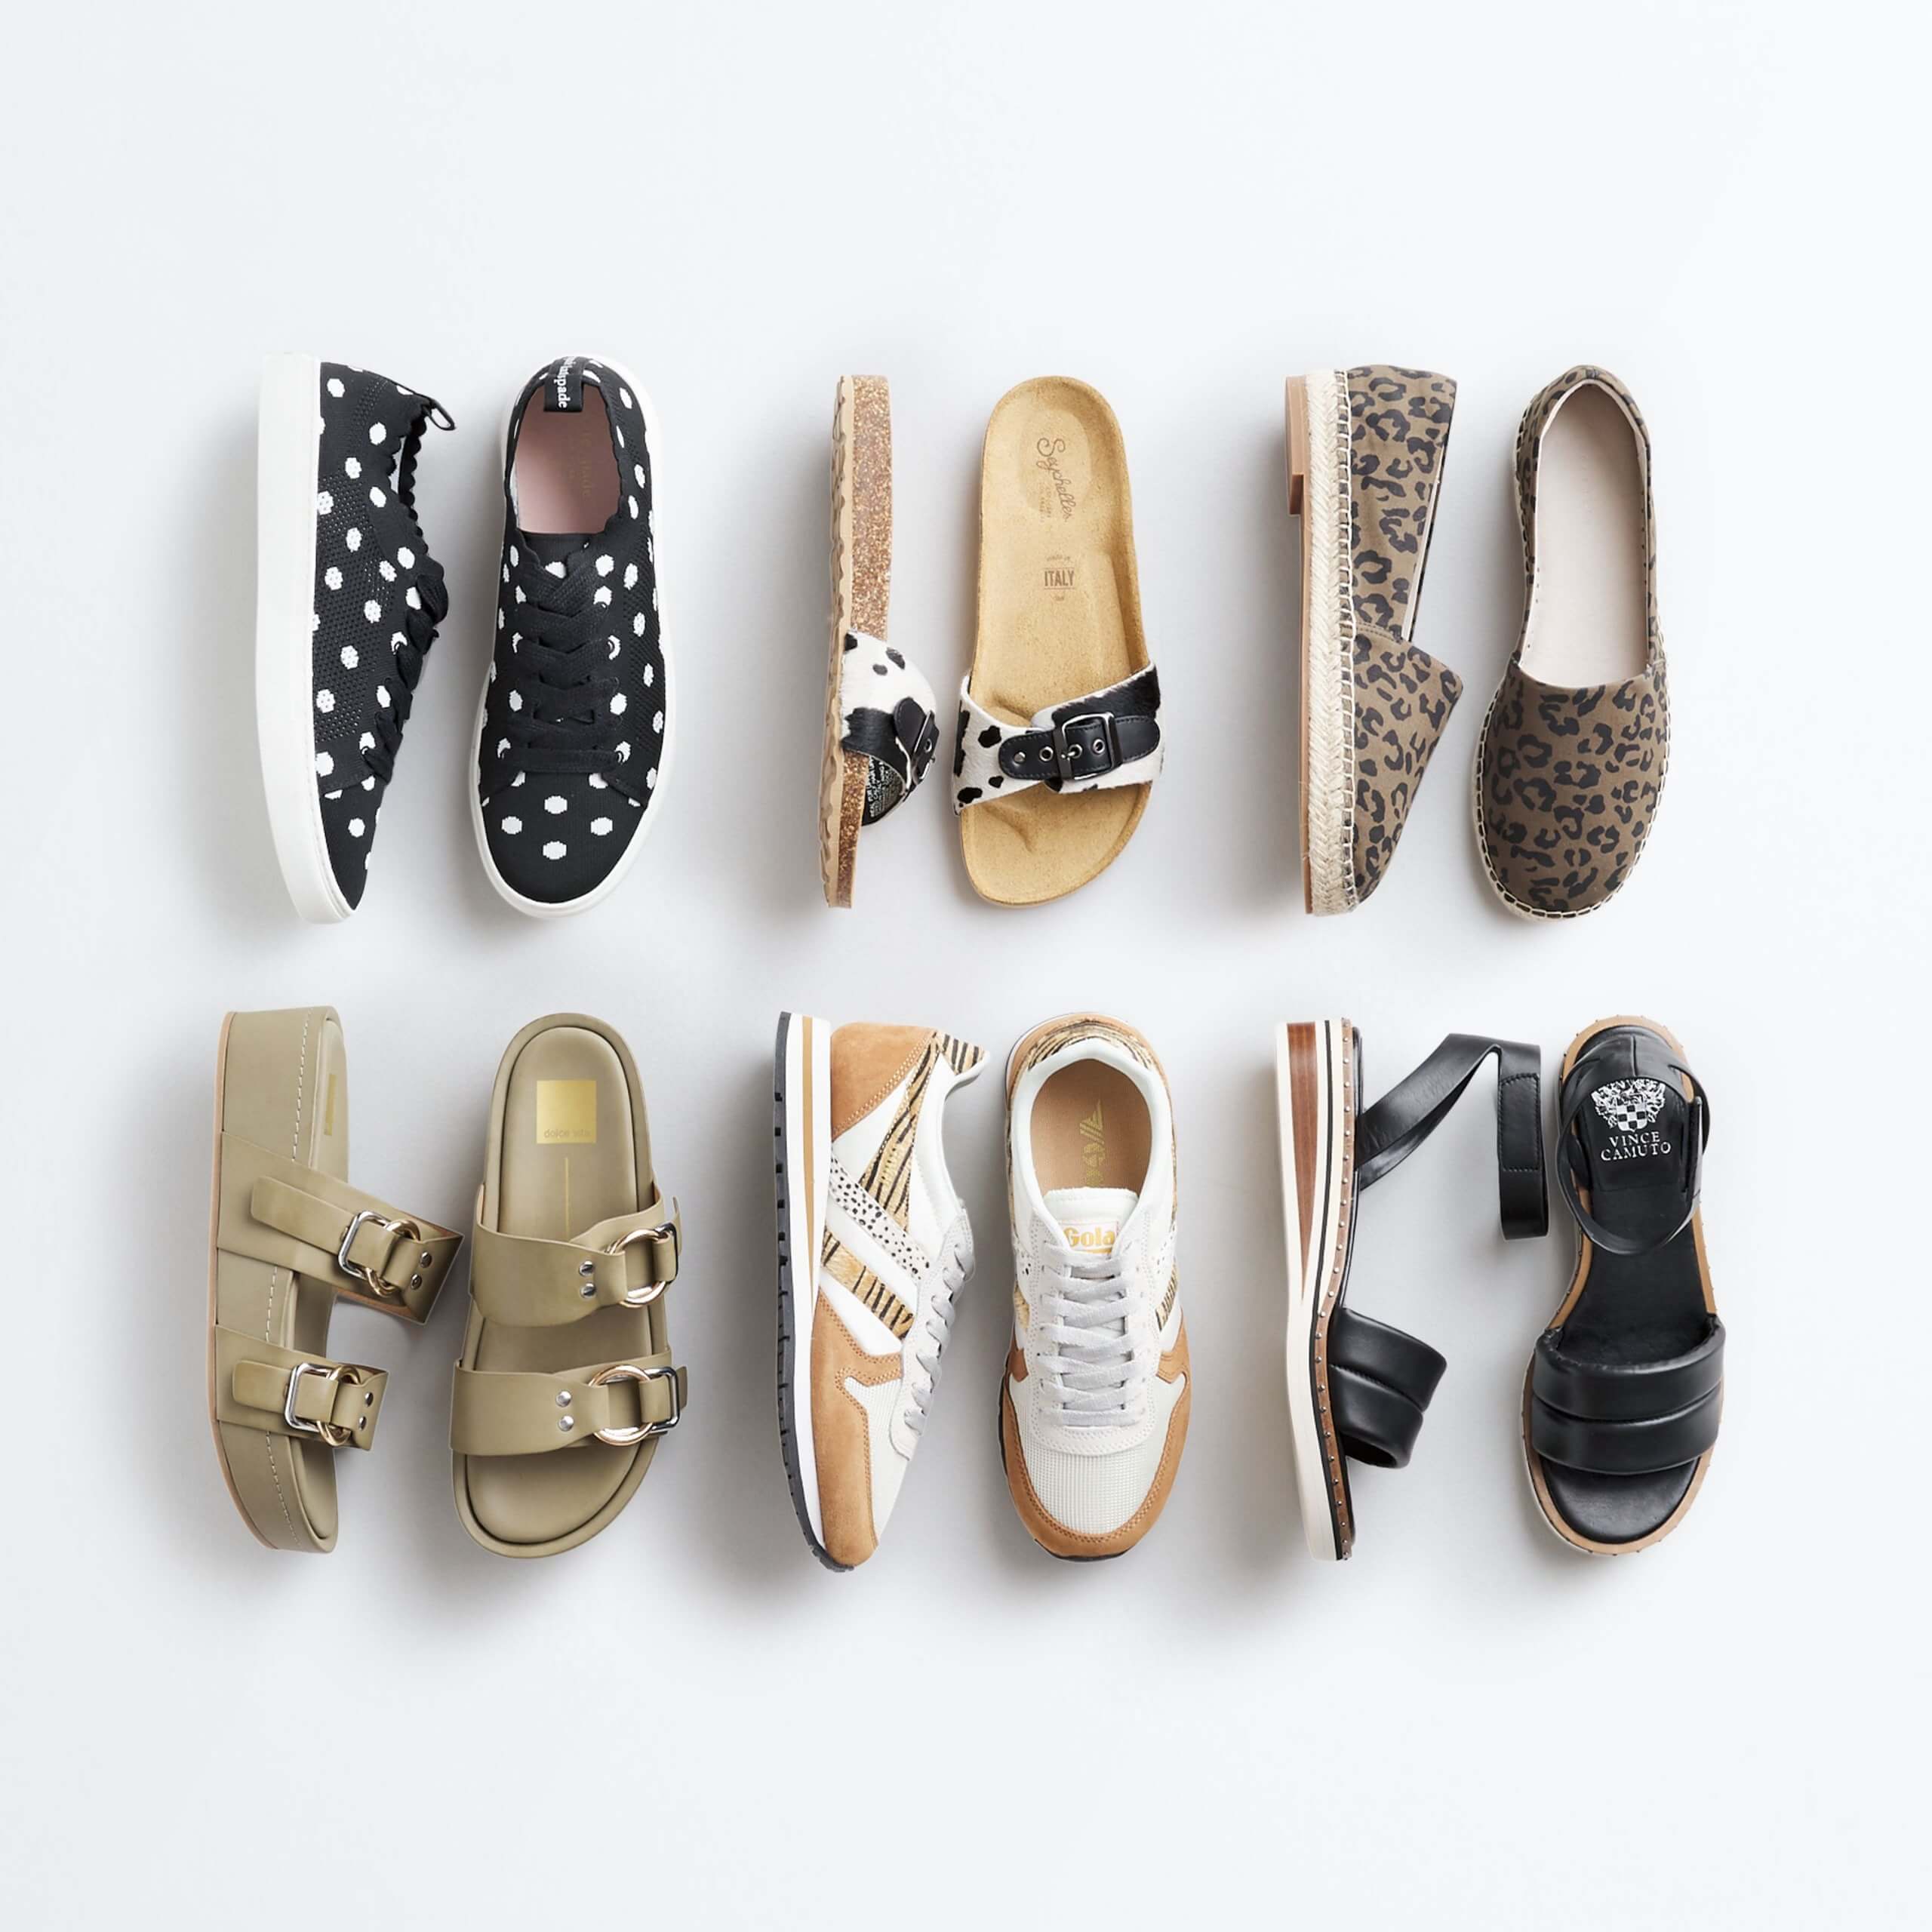 Stitch Fix Women’s shoe display featuring black polka dot sneakers, tan slide sandals with black straps, cheetah print slip-ons, olive slide sandals, white and tan sneakers, black open-toe wedges.